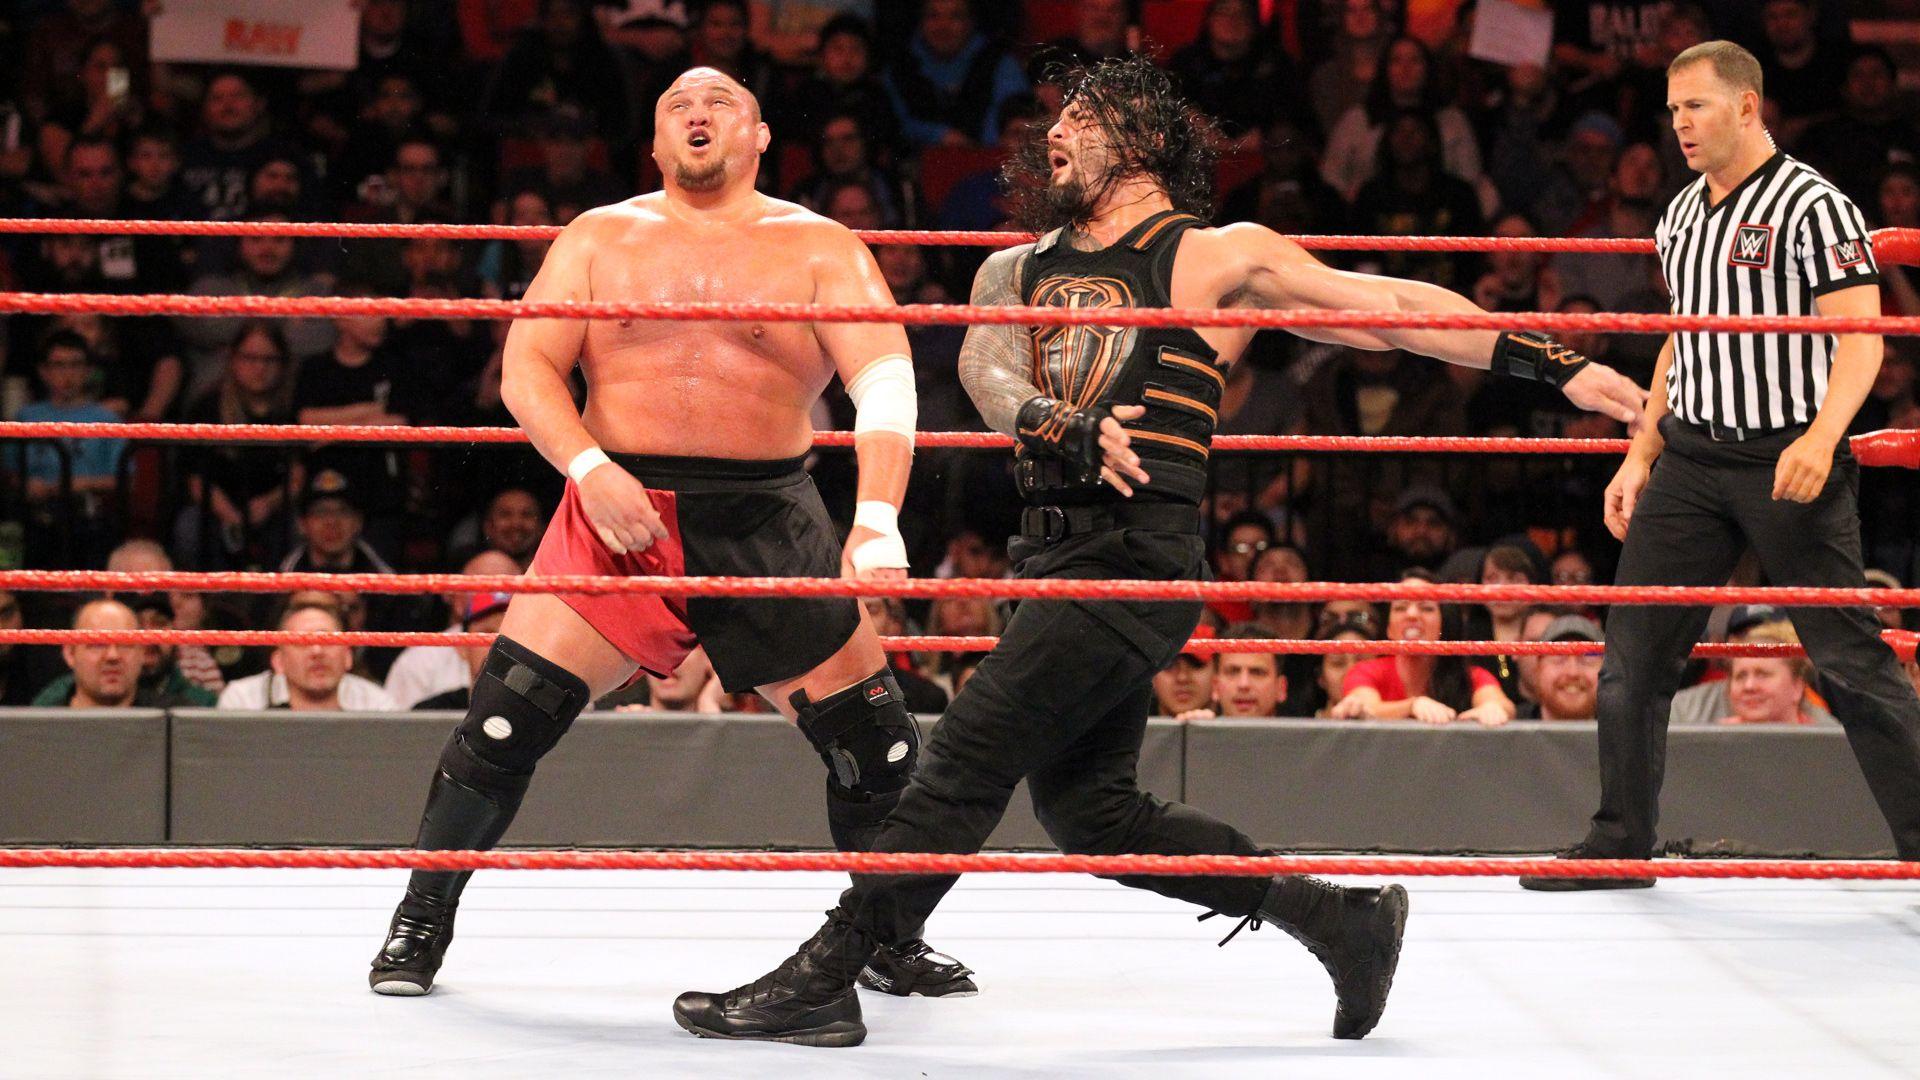 A very unflattering photo from Samoa Joe's Raw debut against Roman